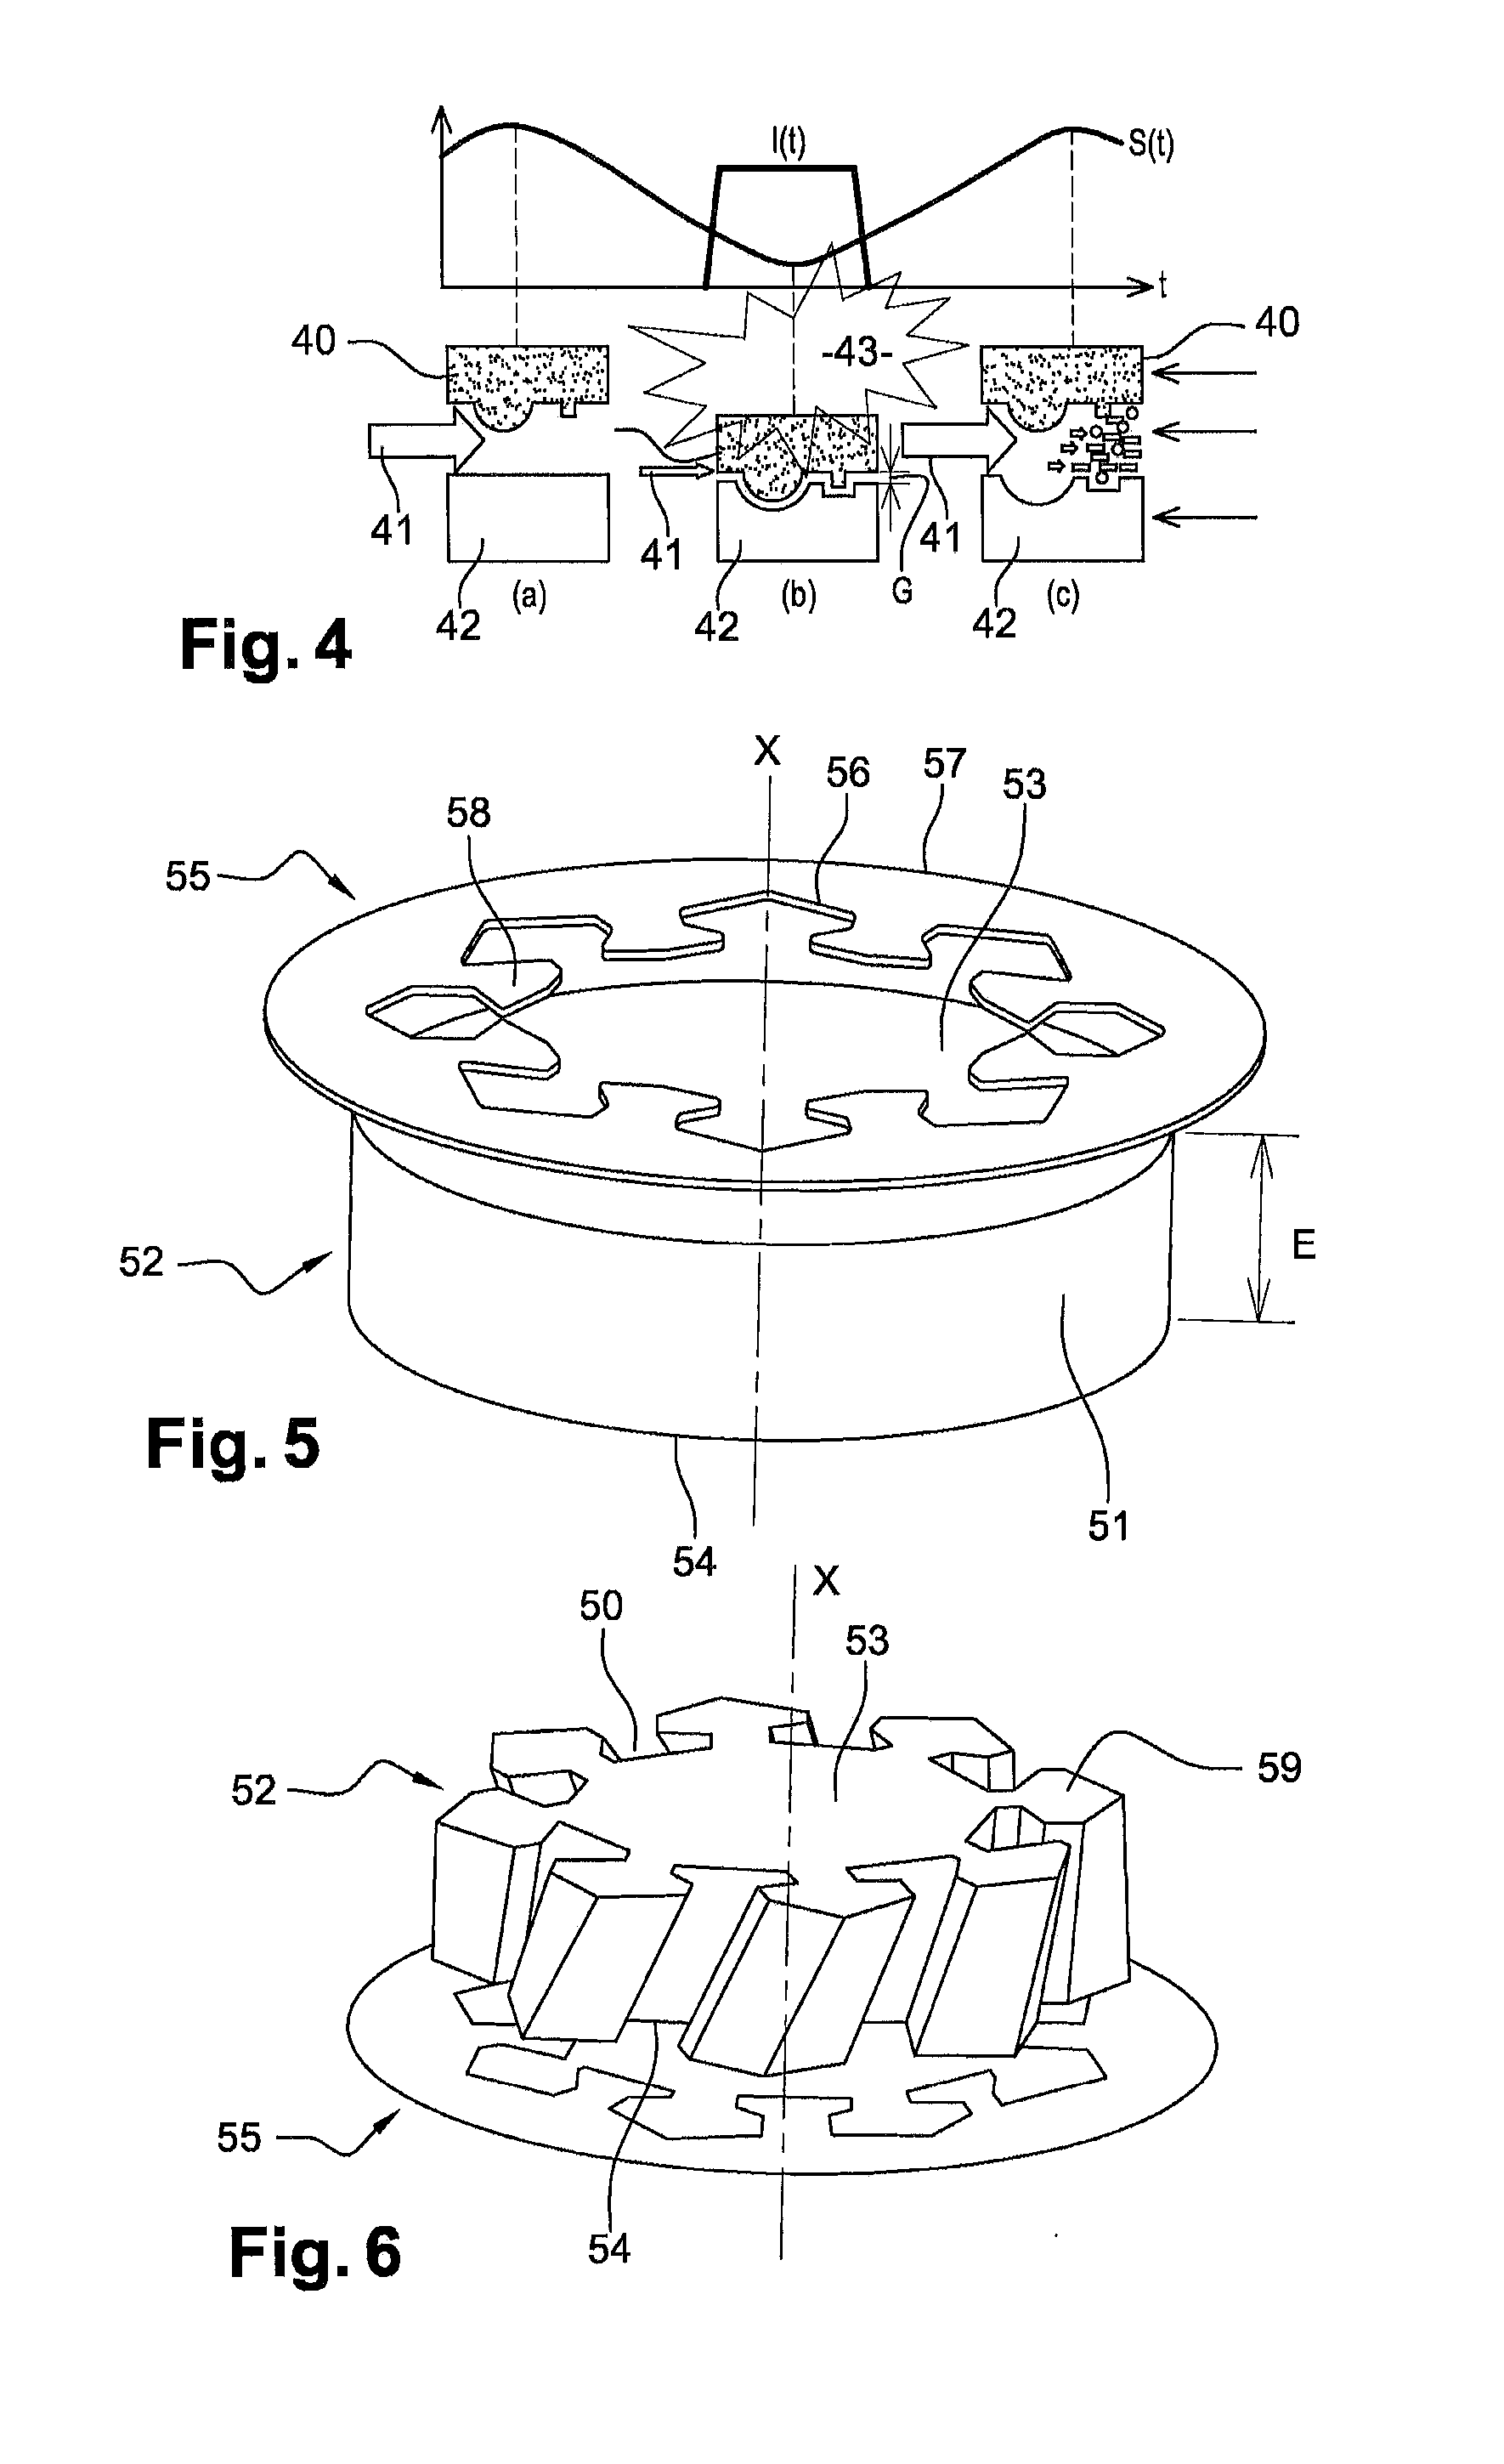 Method for producing cavities for a turbomachine disk